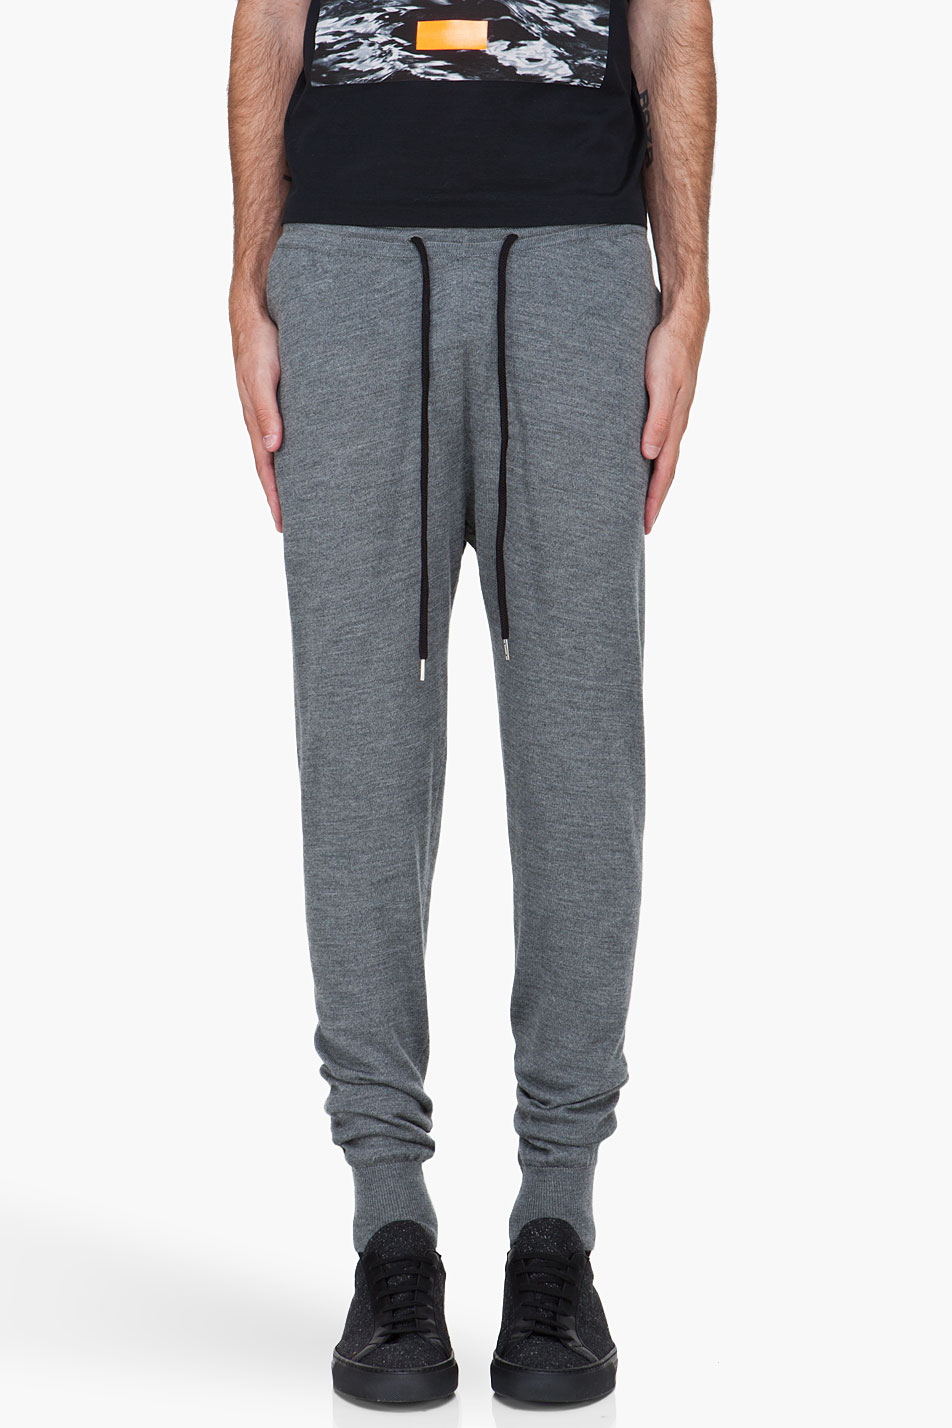 Markus Lupfer Grey Knitted Wool Jogger Pants in Gray for Men (grey) | Lyst